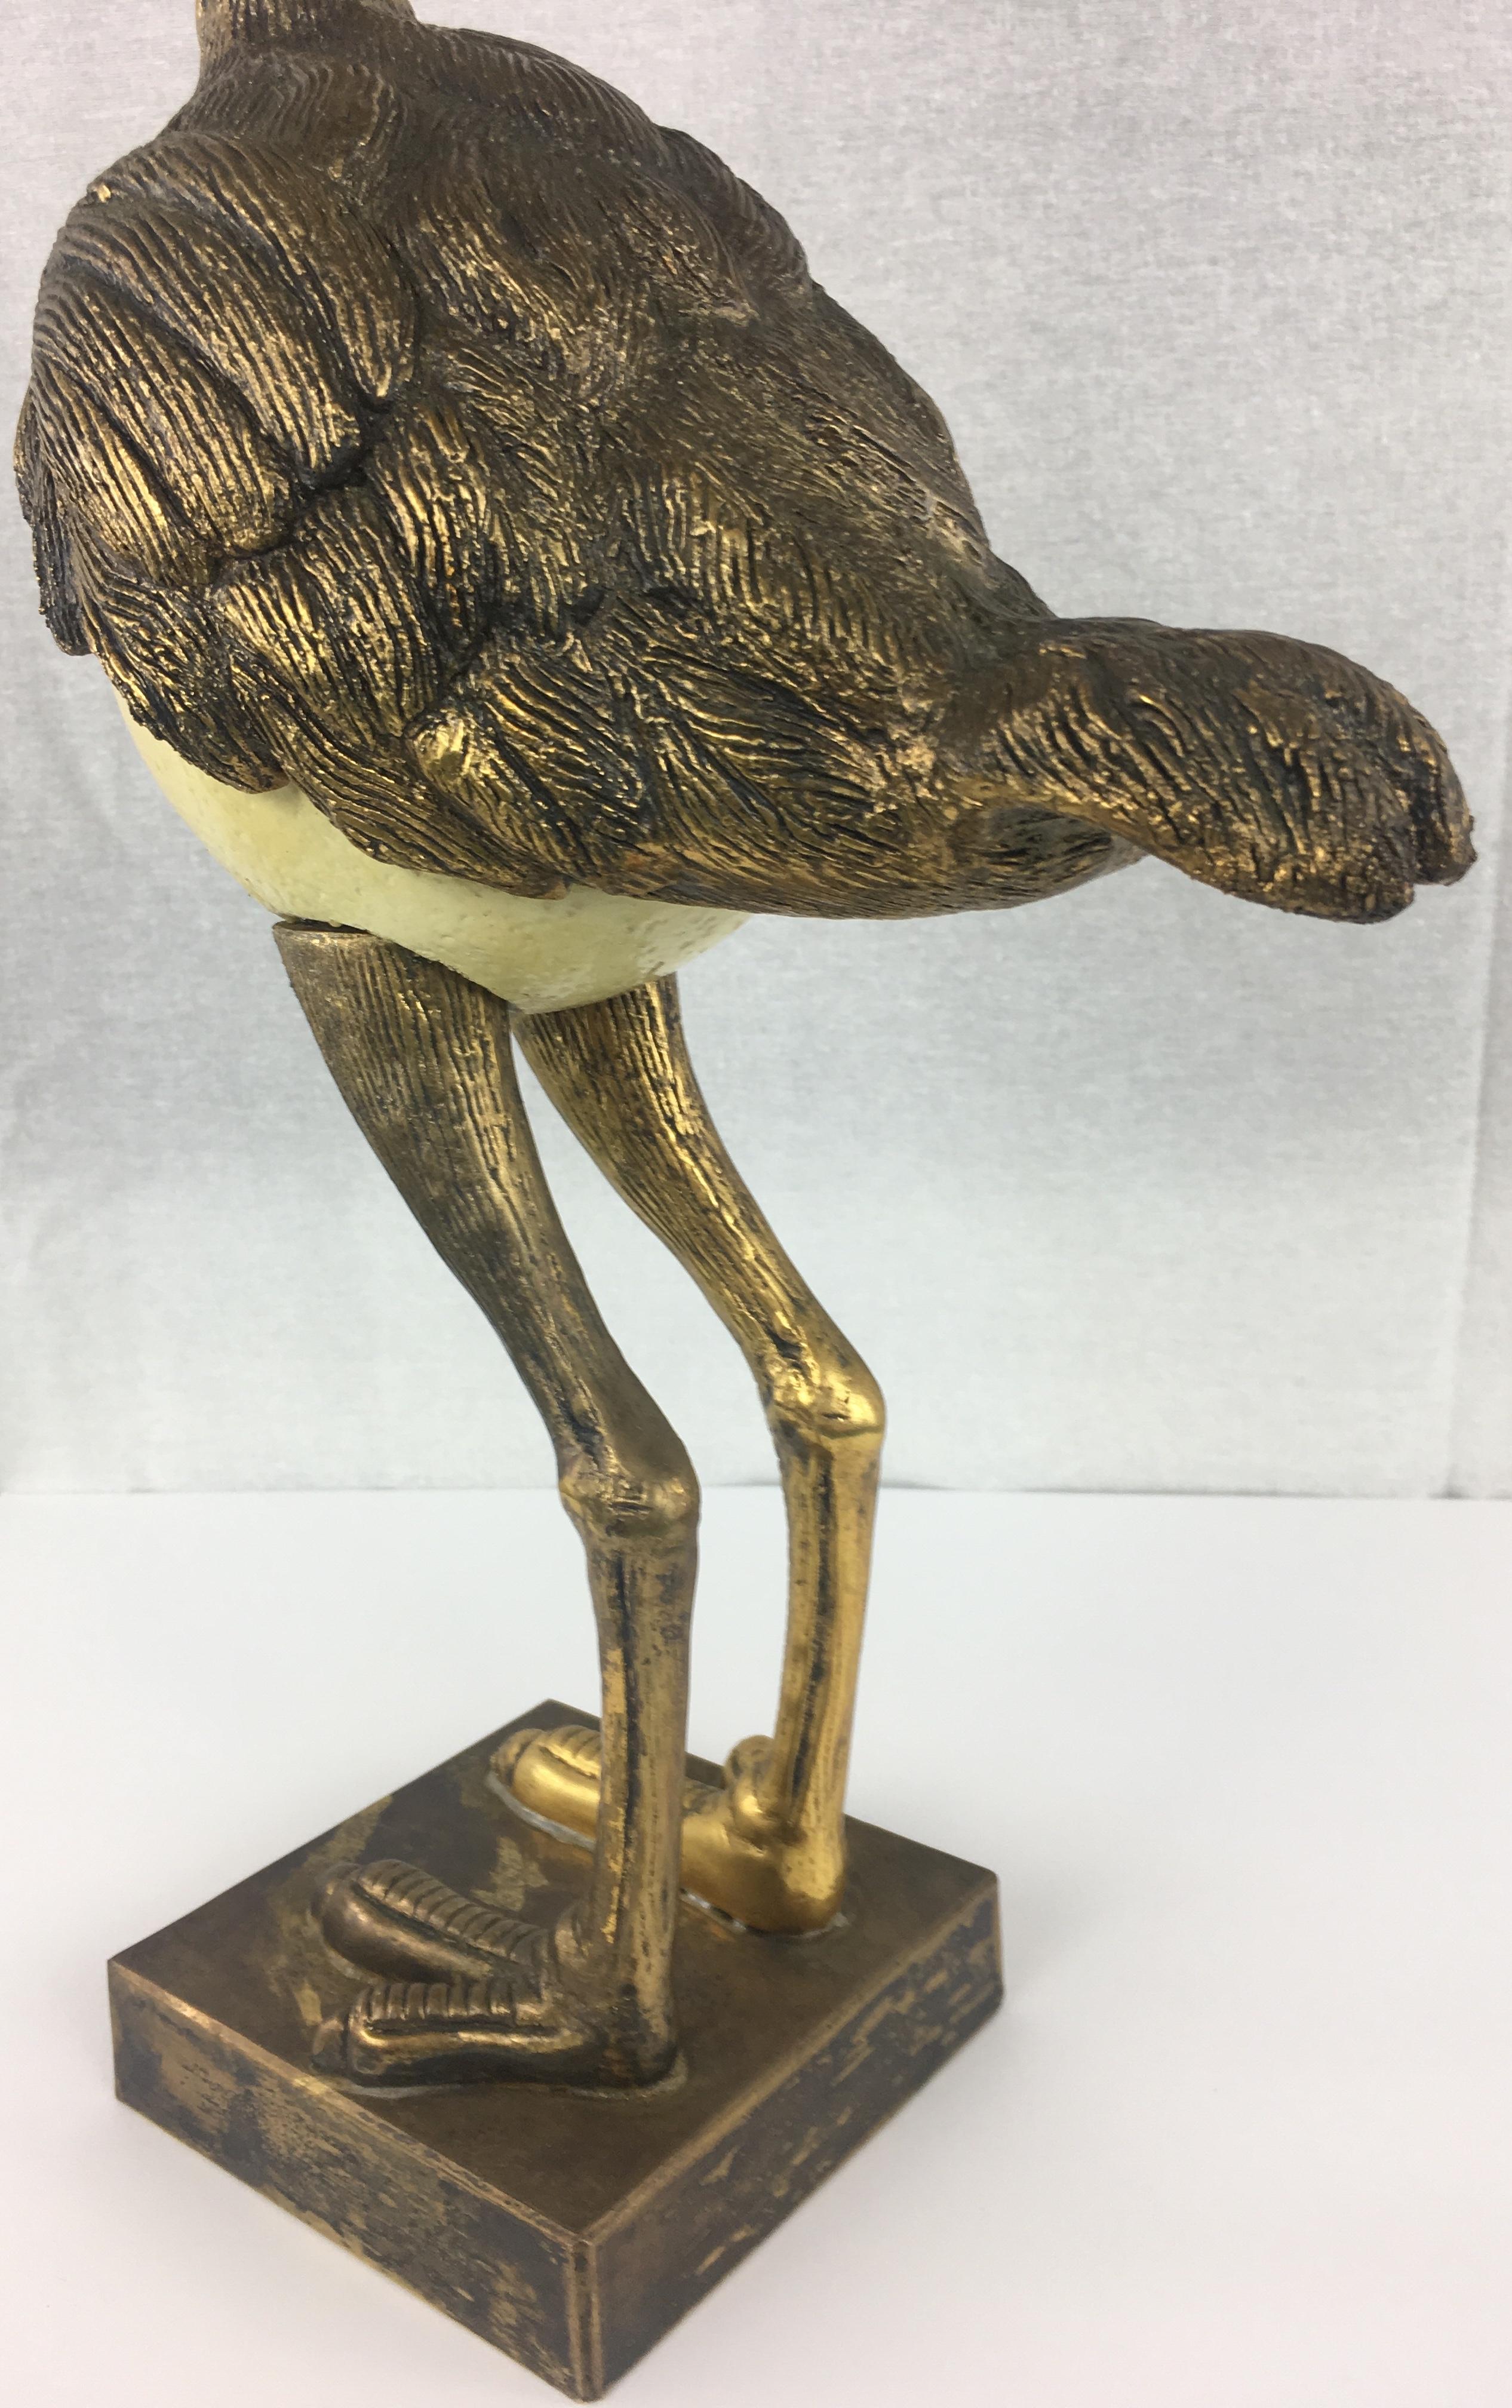 20th Century Unique Midcentury Ostrich Sculpture by Anthony Redmile and Gabriella Binazzi